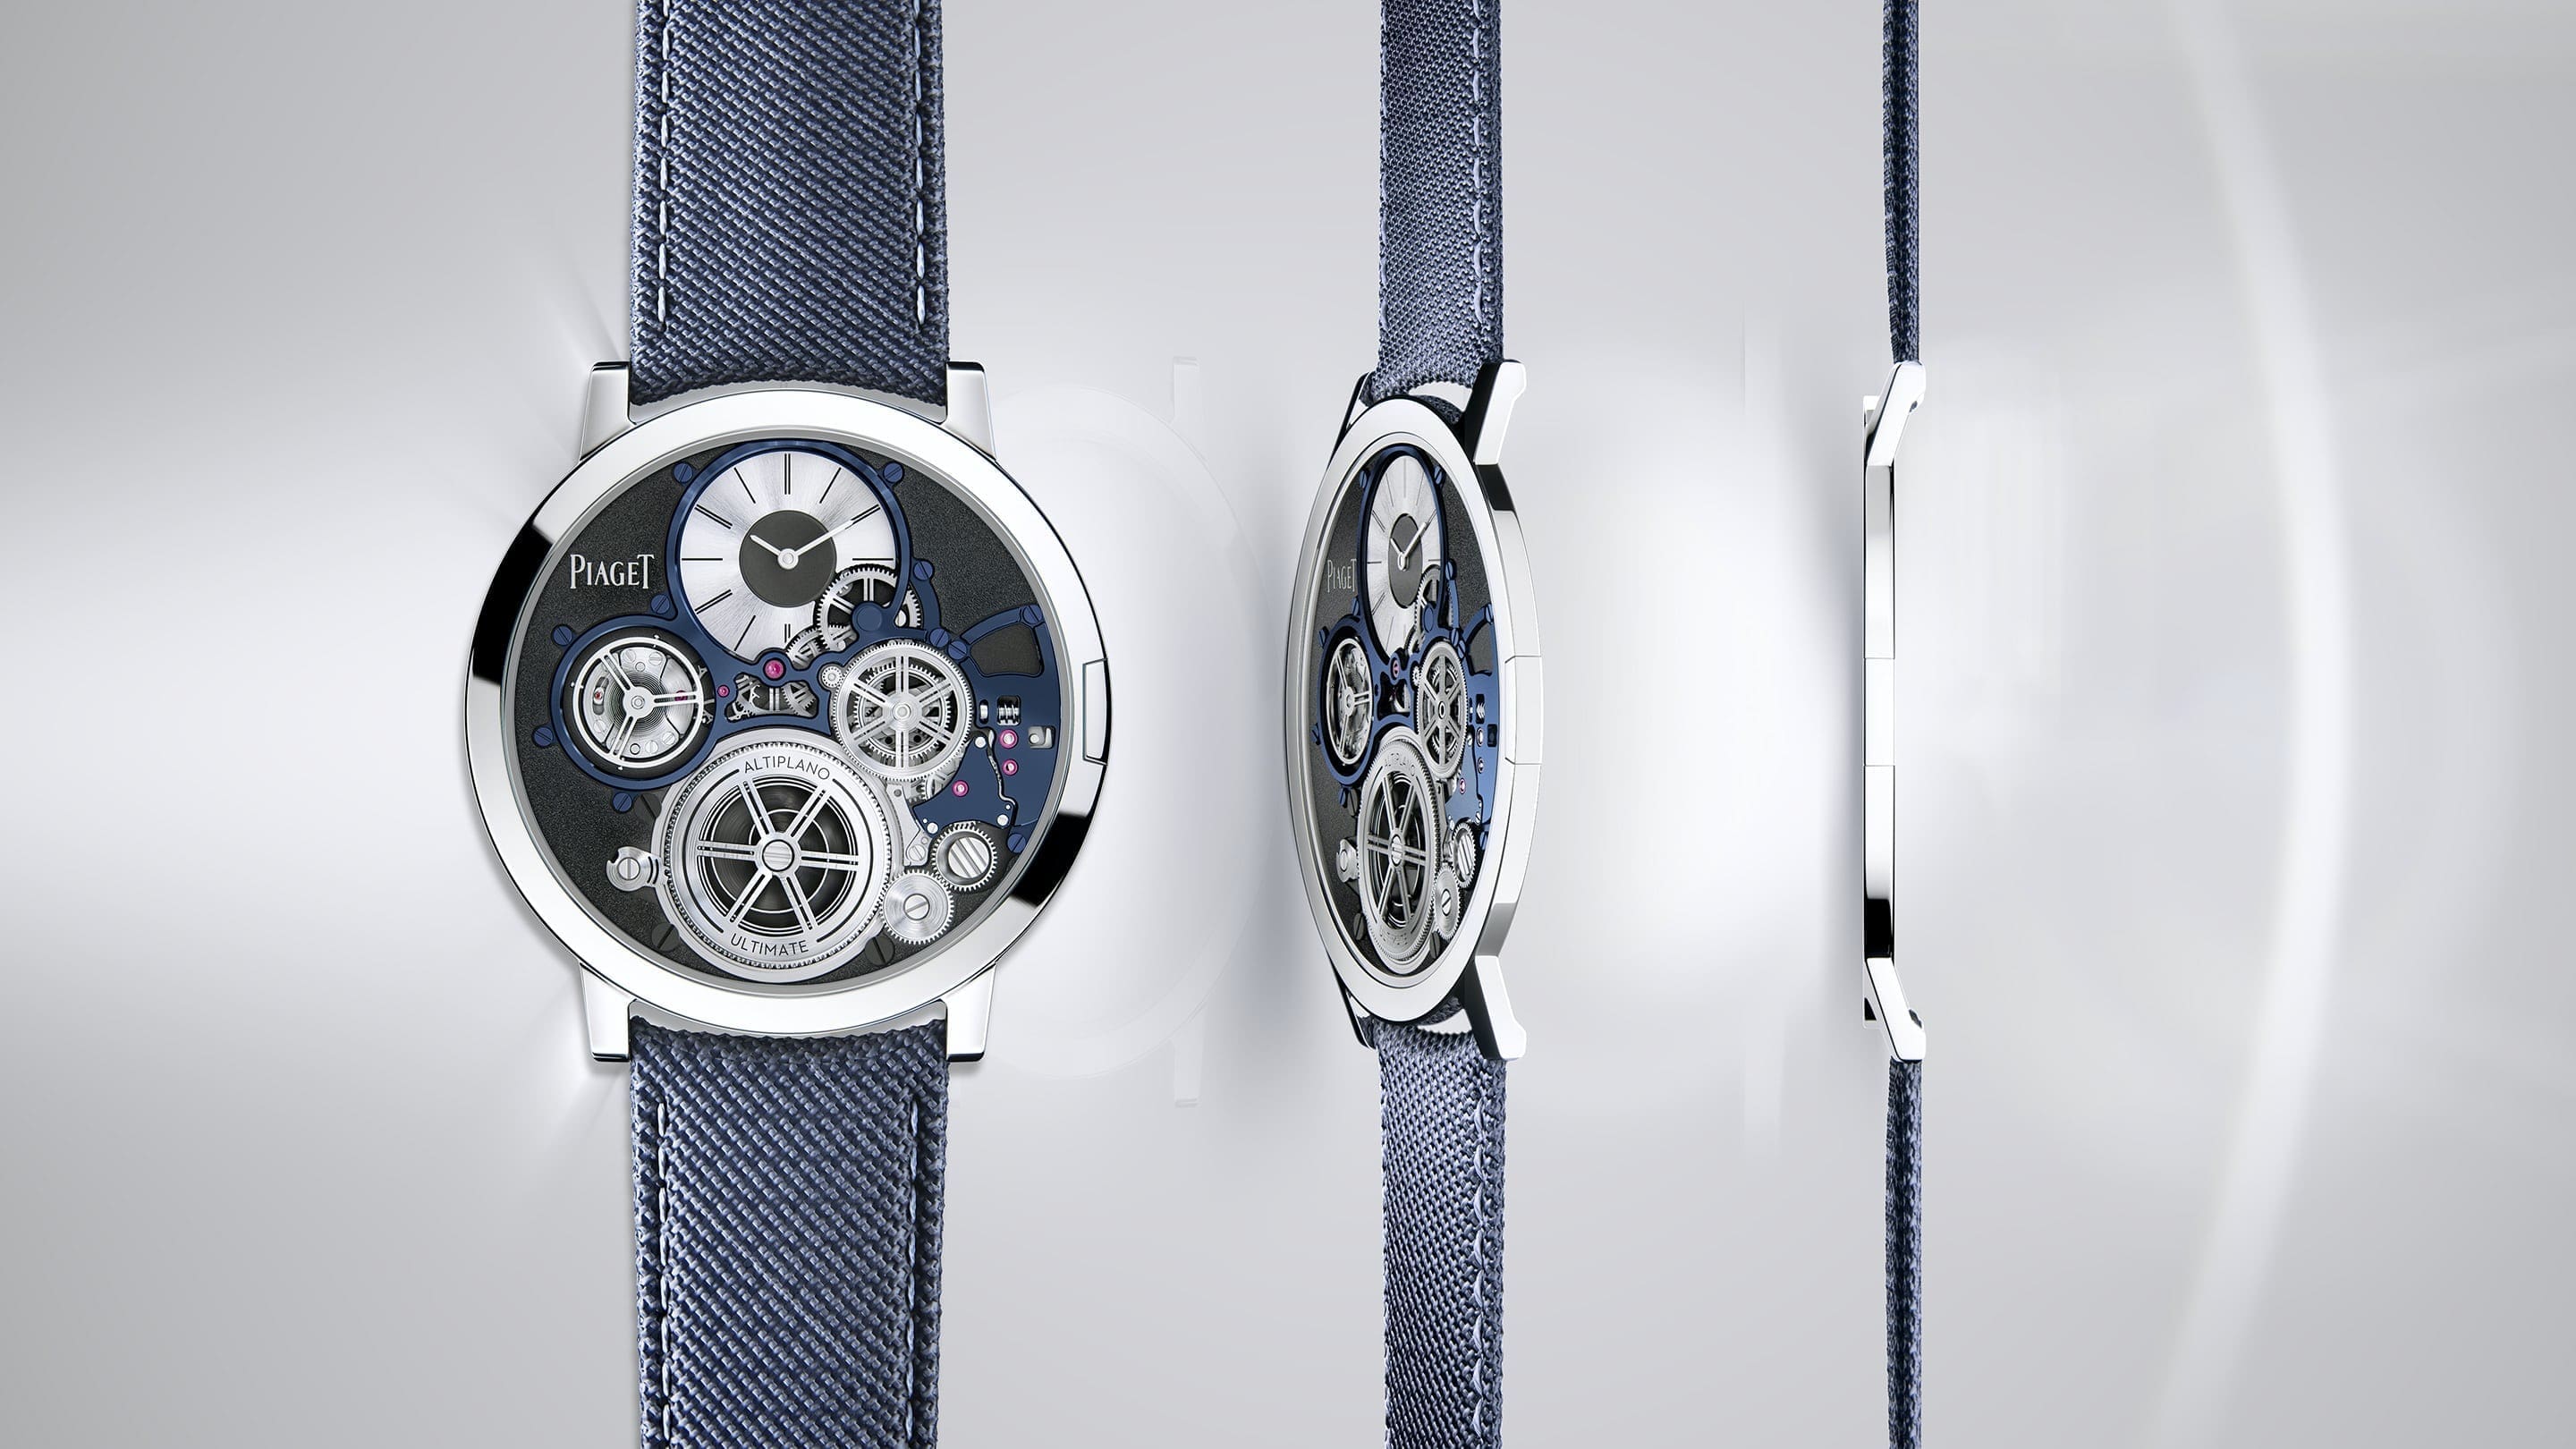 EDITOR’S PICK: How the thinnest watch ever made came into existence